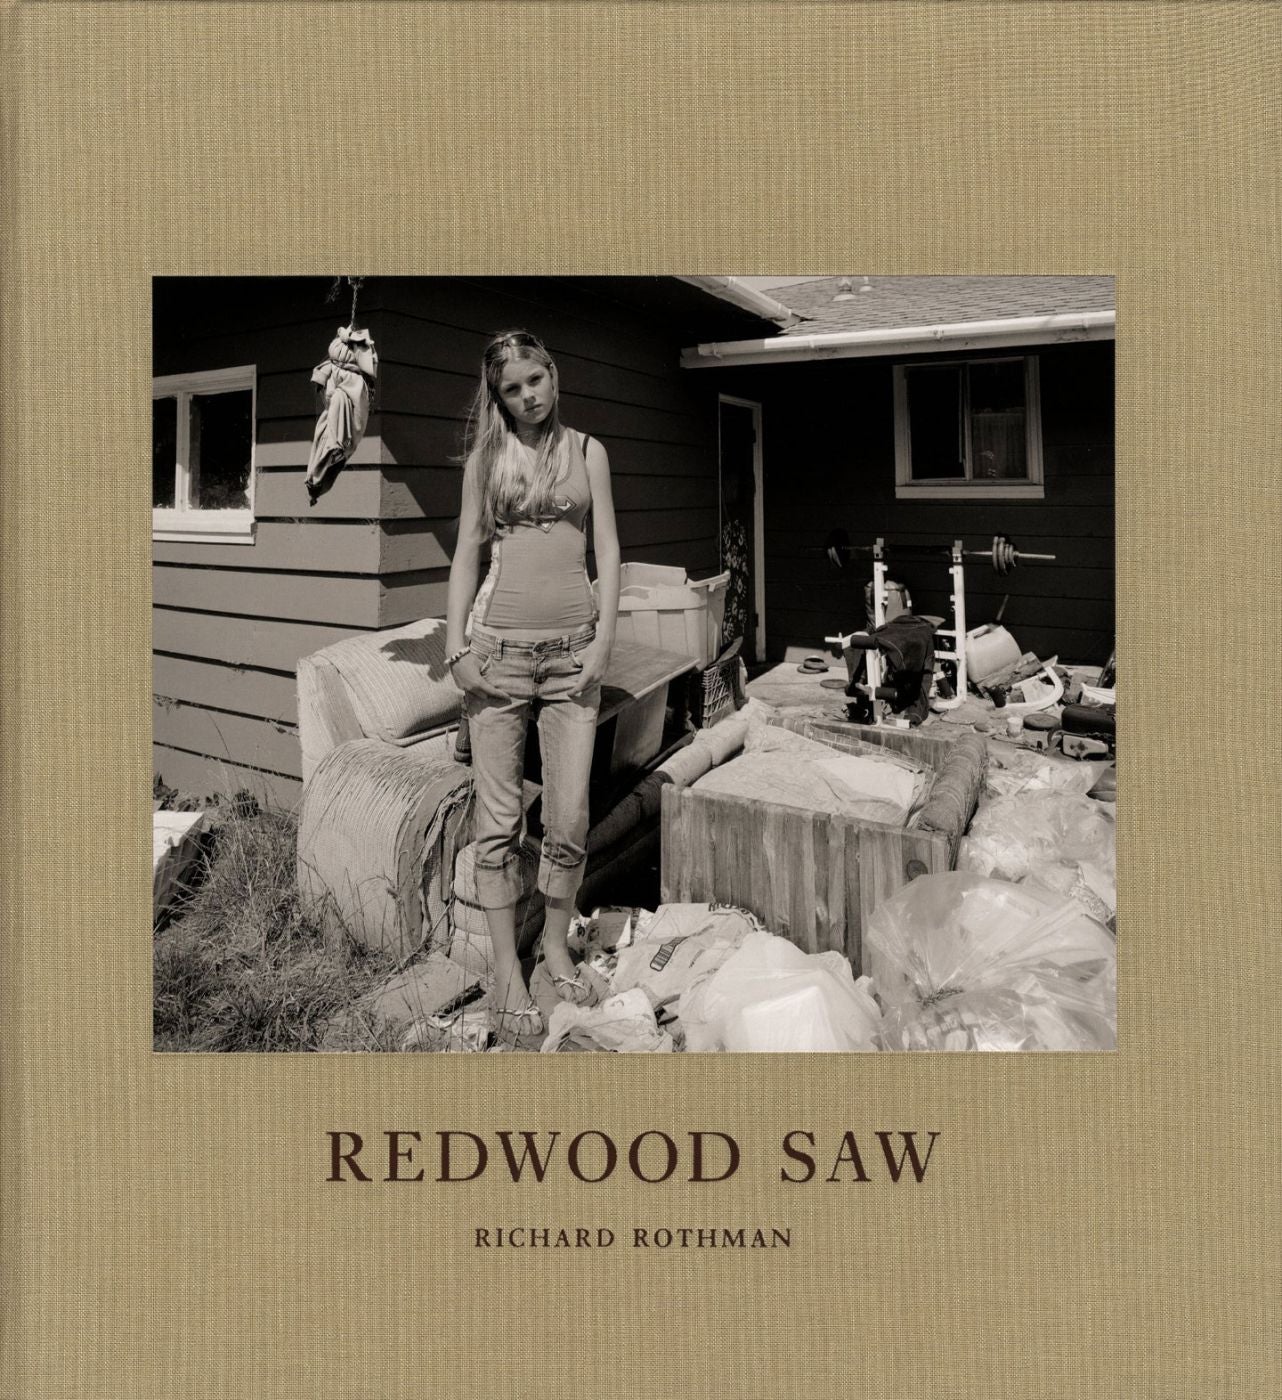 Richard Rothman: Redwood Saw, Special Limited Edition (with "Portrait" Print Variant)